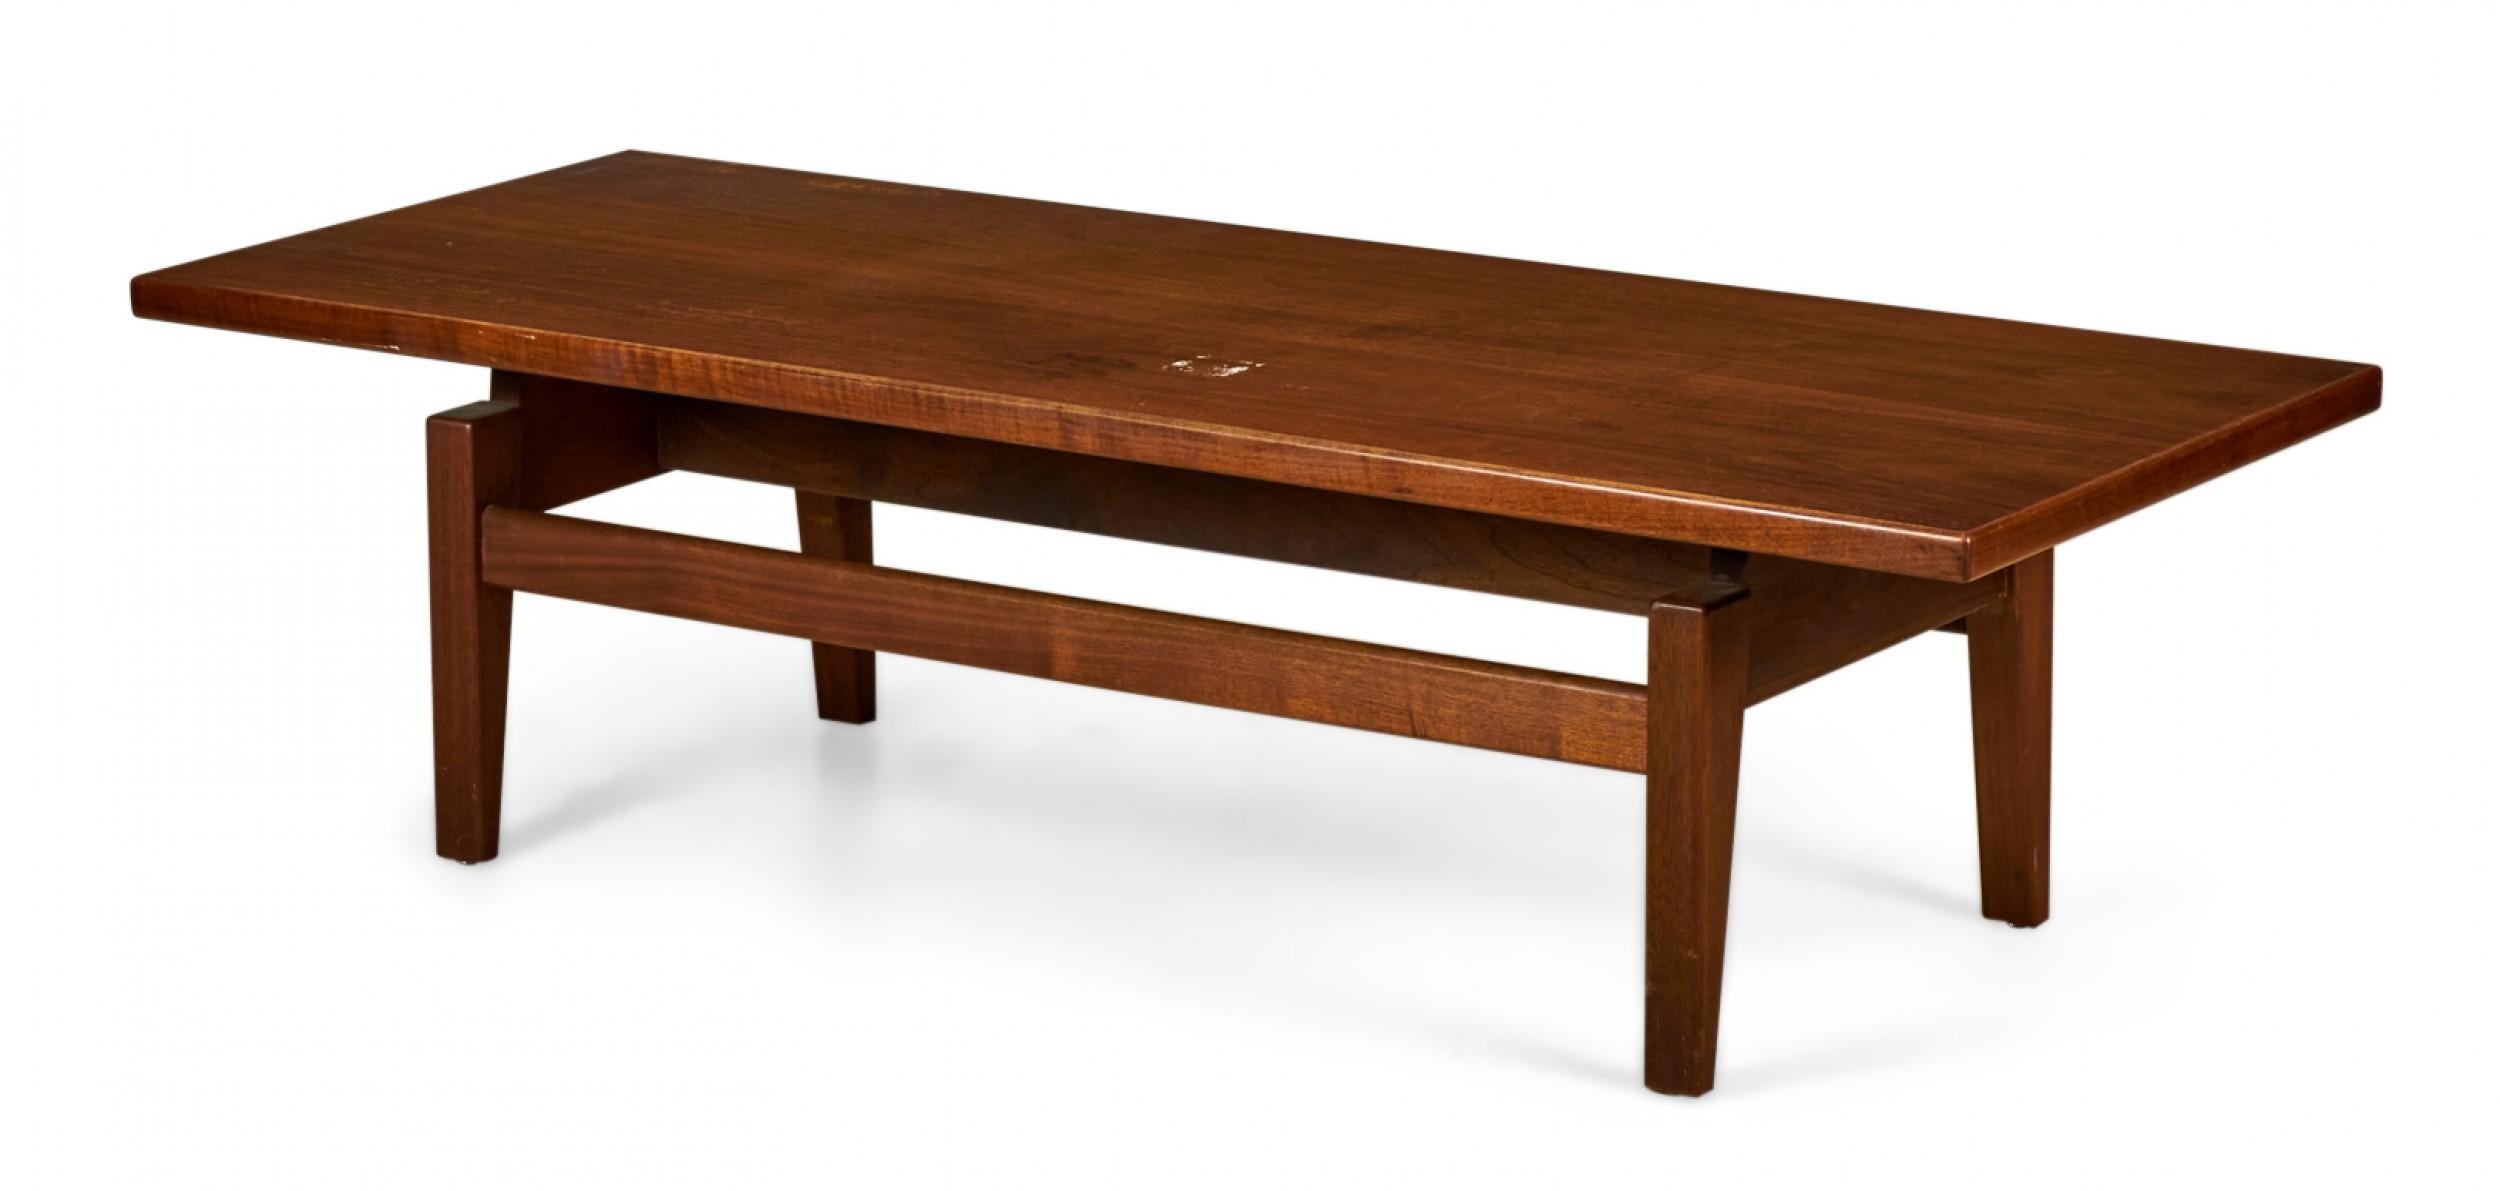 20th Century Pair of Jens Risom Danish Mid-Century Floating Top Walnut Coffee Table / Benches For Sale